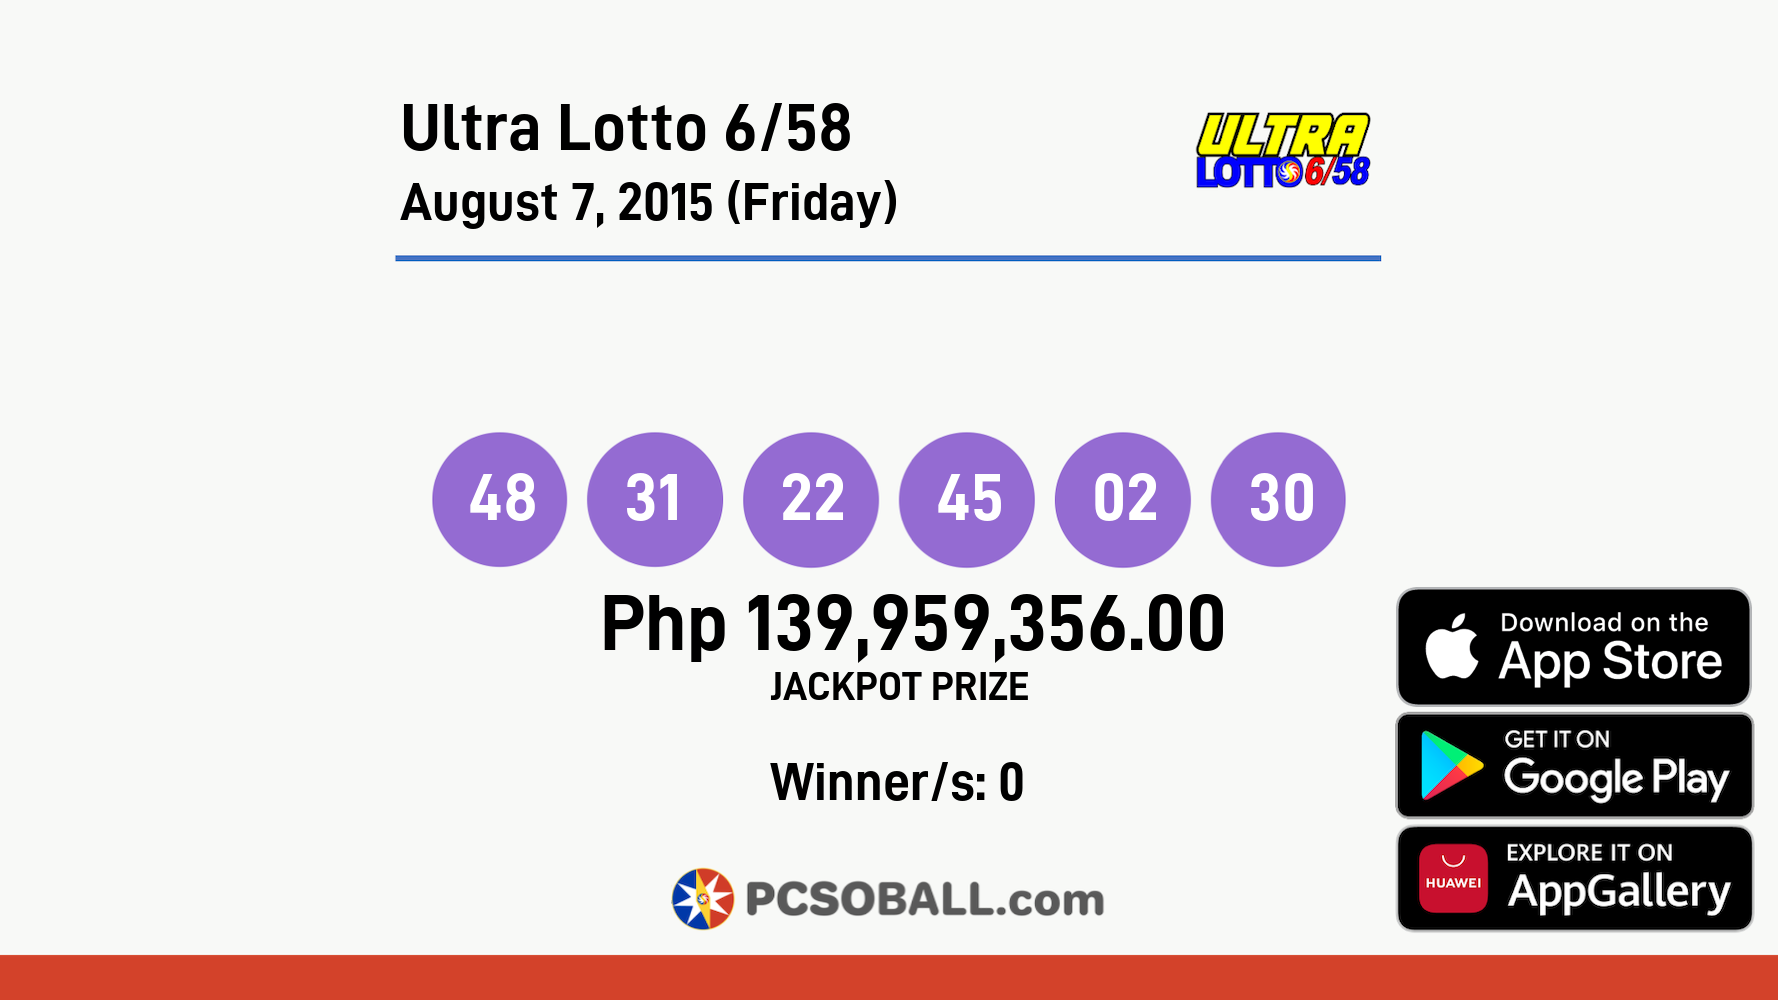 Ultra Lotto 6/58 August 7, 2015 (Friday) Result